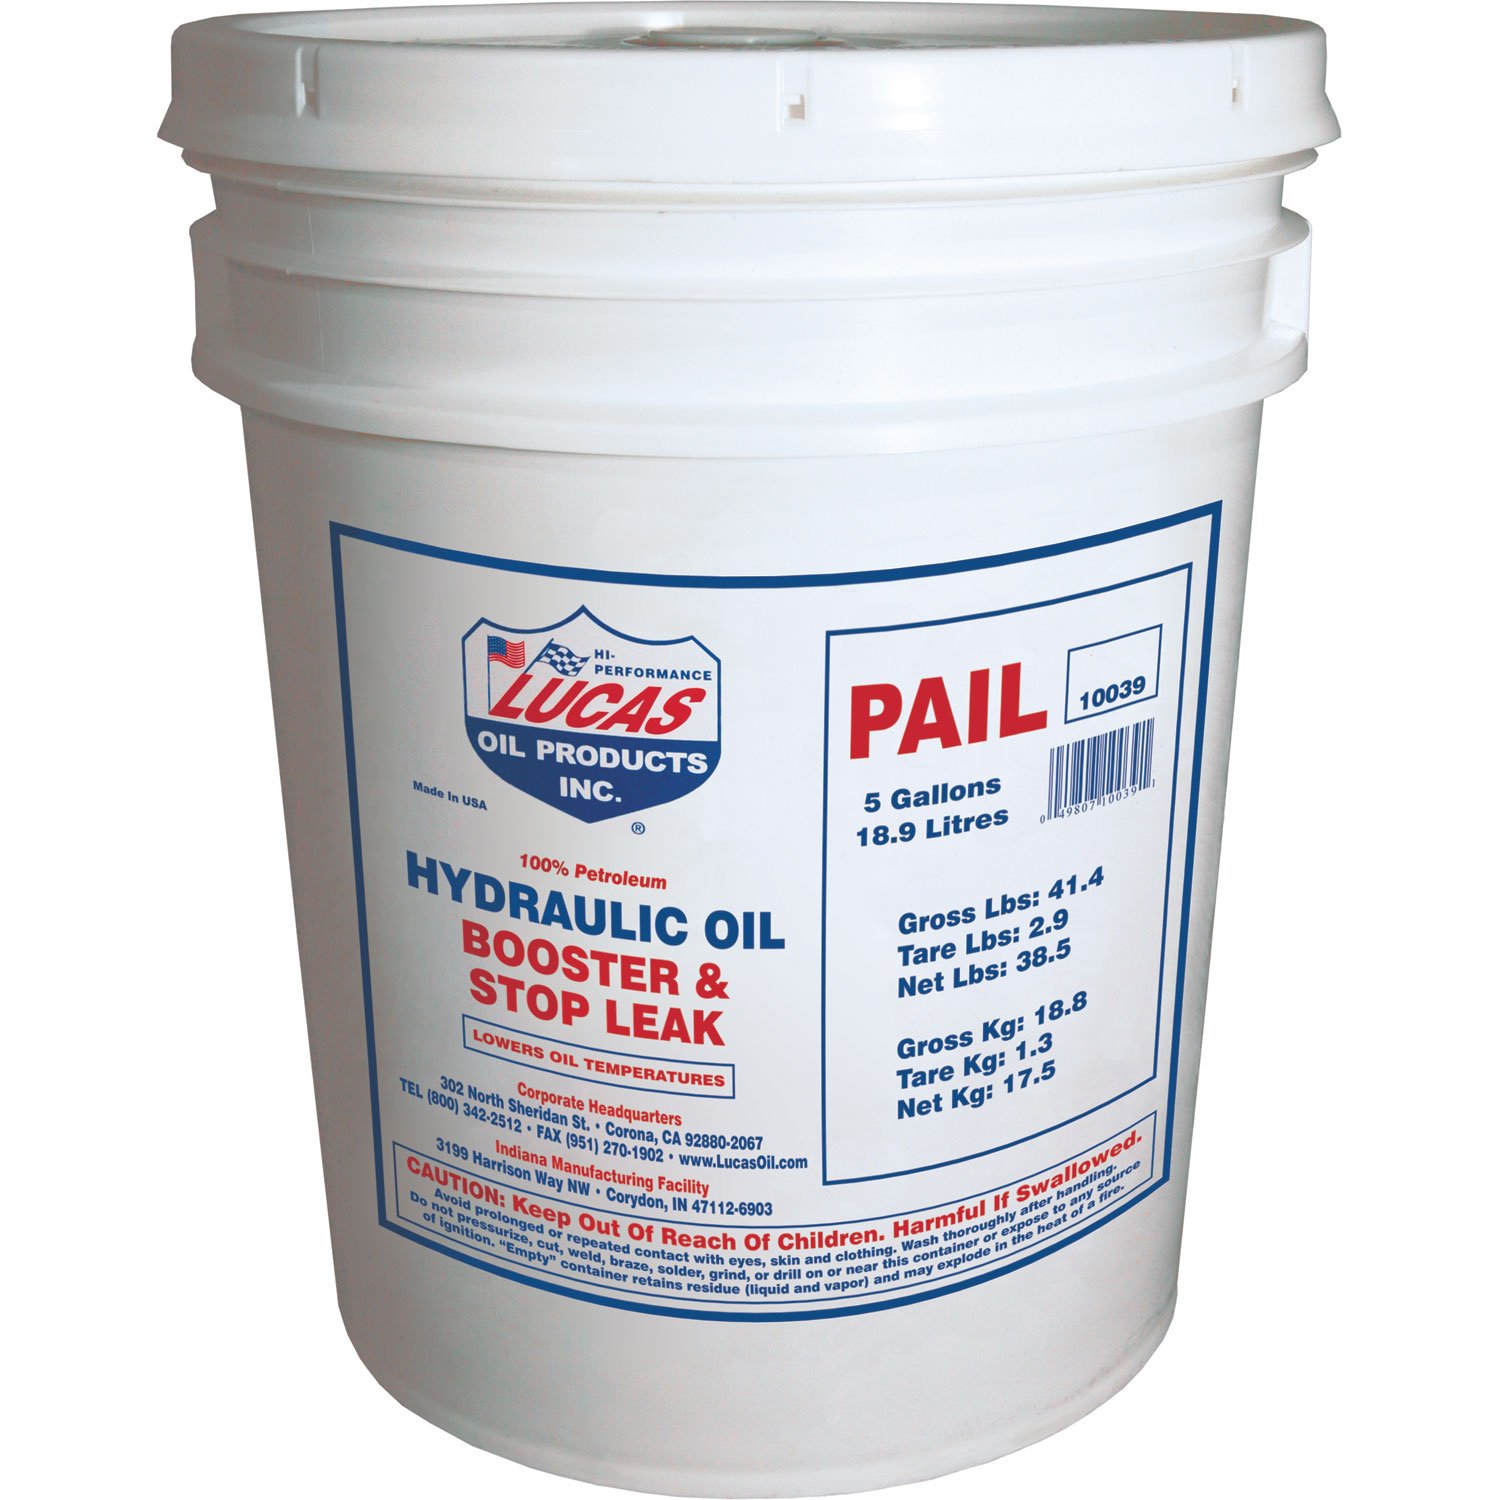 10039 Hydraulic Oil Booster/Stop Leak 5-Gallons